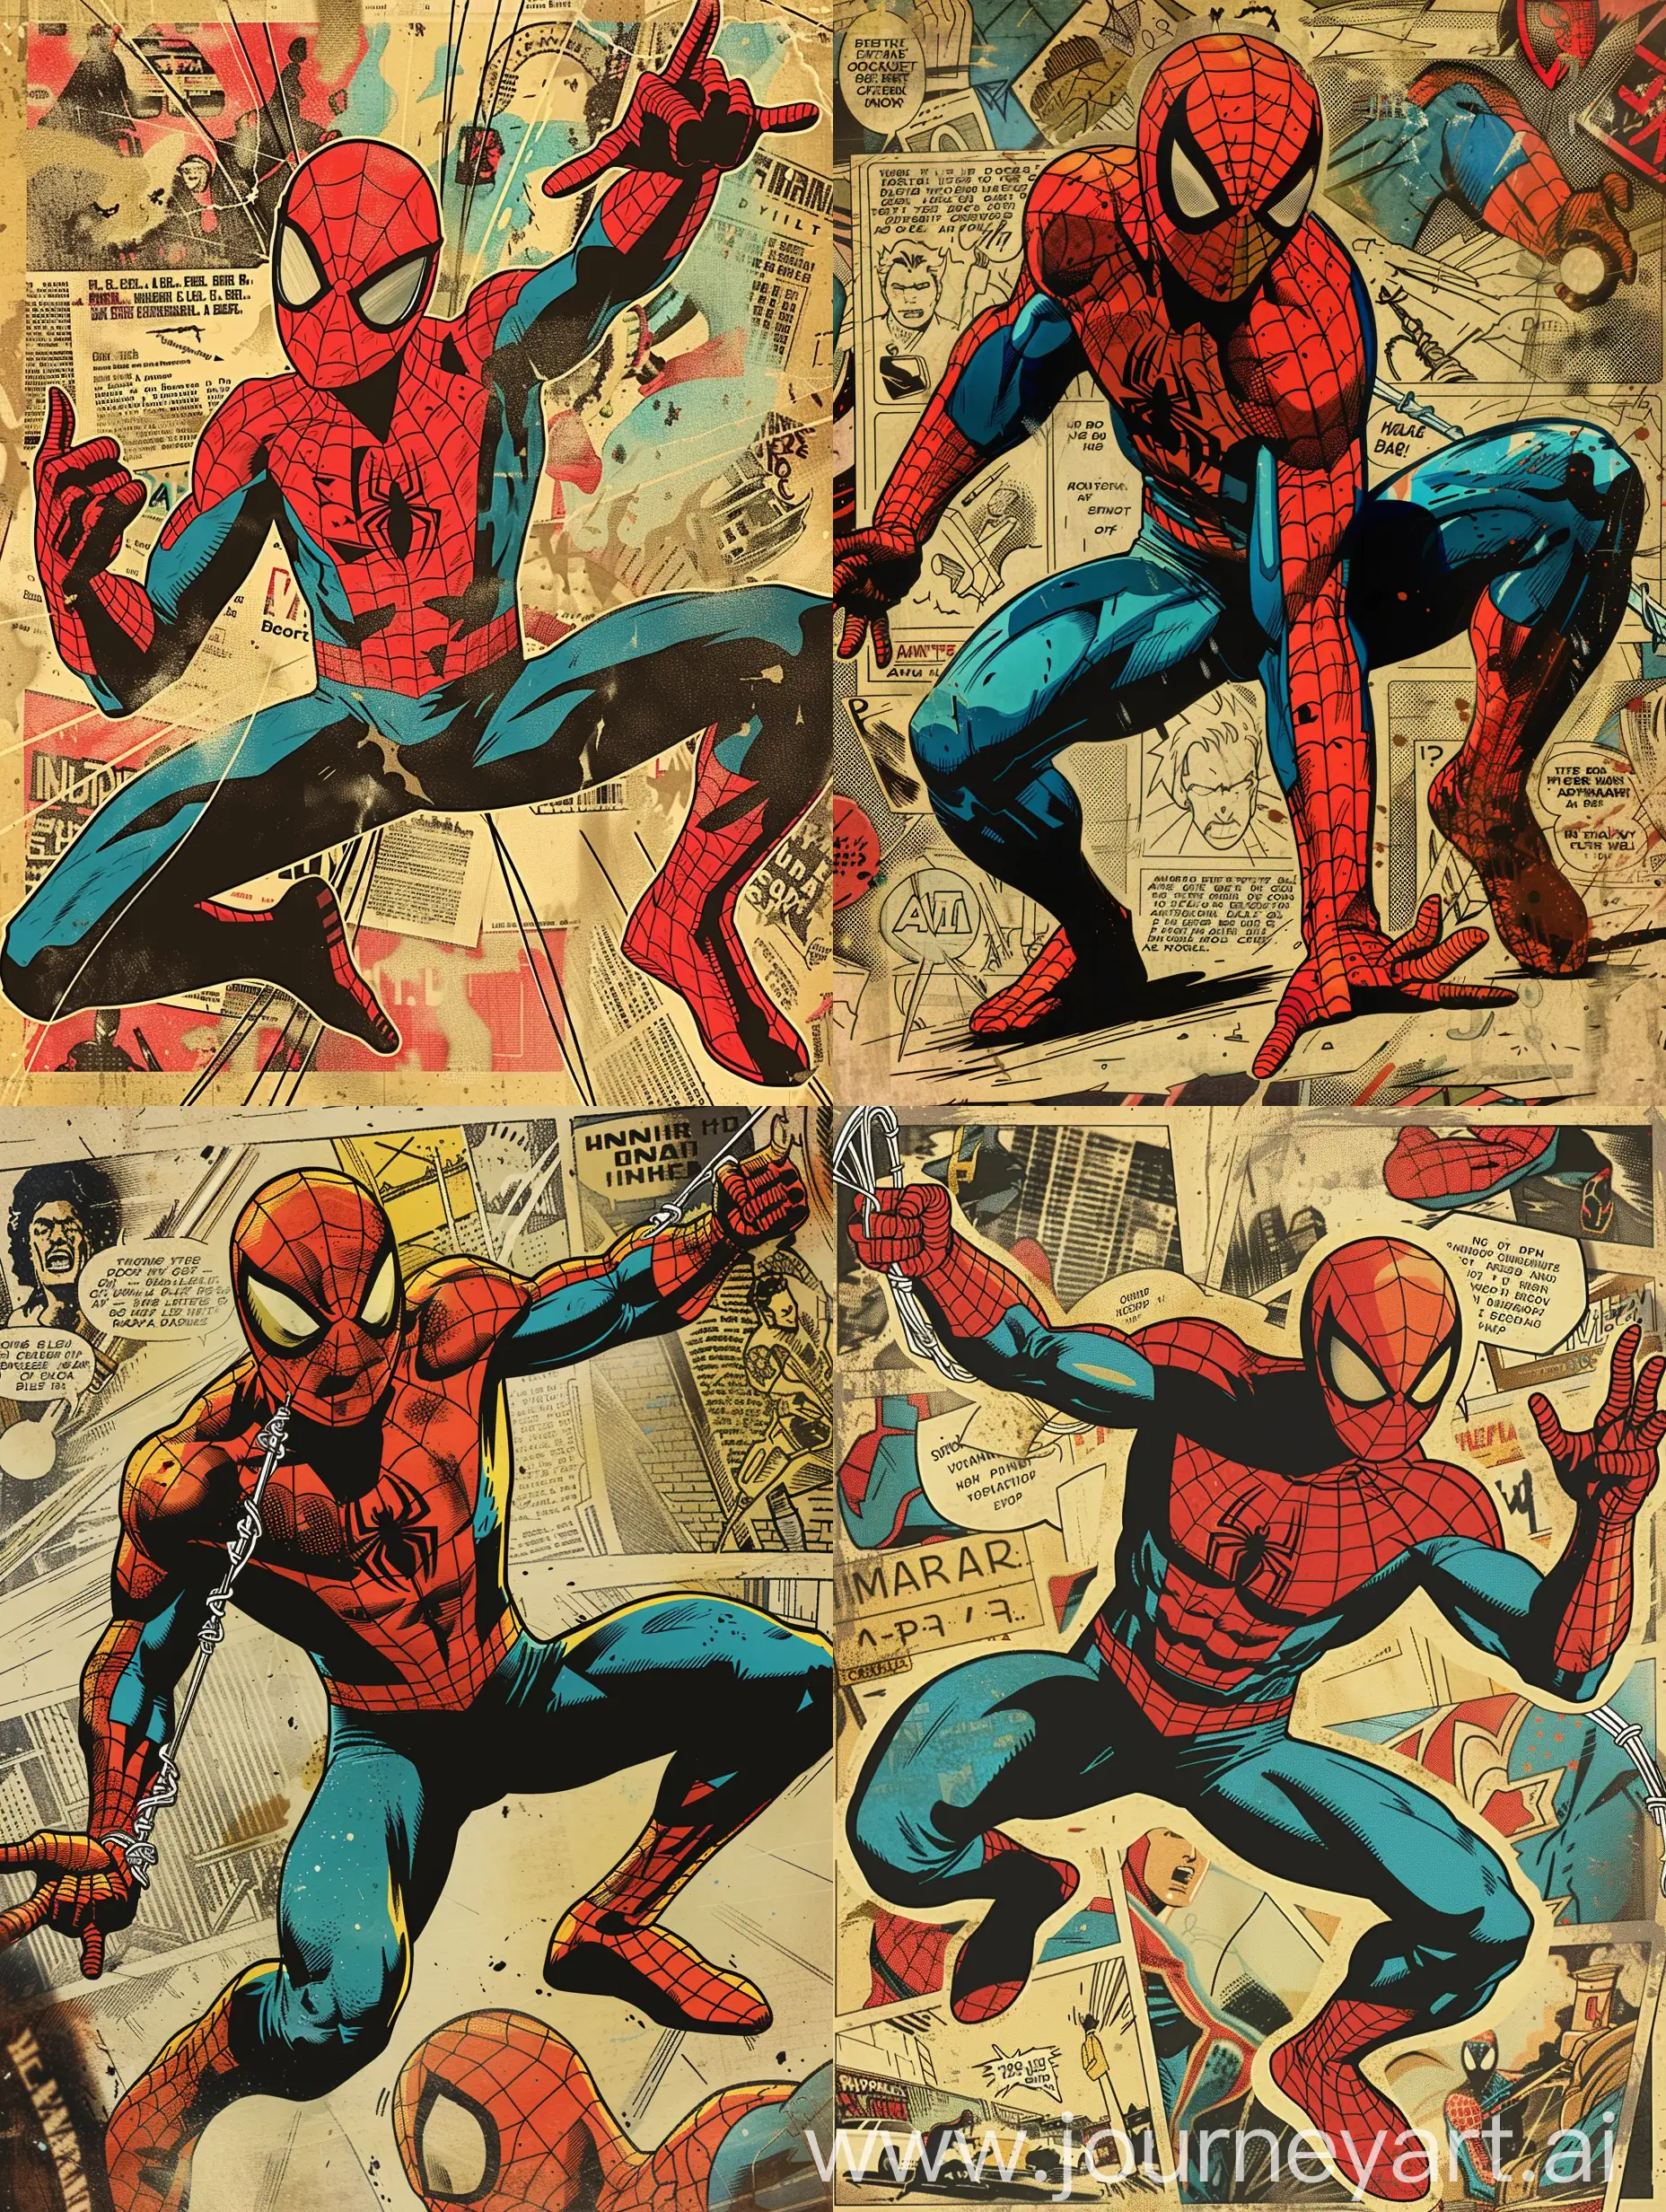 Generate an engaging mobile wallpaper by illustrating Spider-Man in a classic comic book style. Highlight his iconic red and blue costume, dynamic pose, and feature a comic strip-like background with action lines and speech bubbles. The artwork should be vibrant, detailed, and instantly recognizable for fans of the friendly neighborhood superhero.